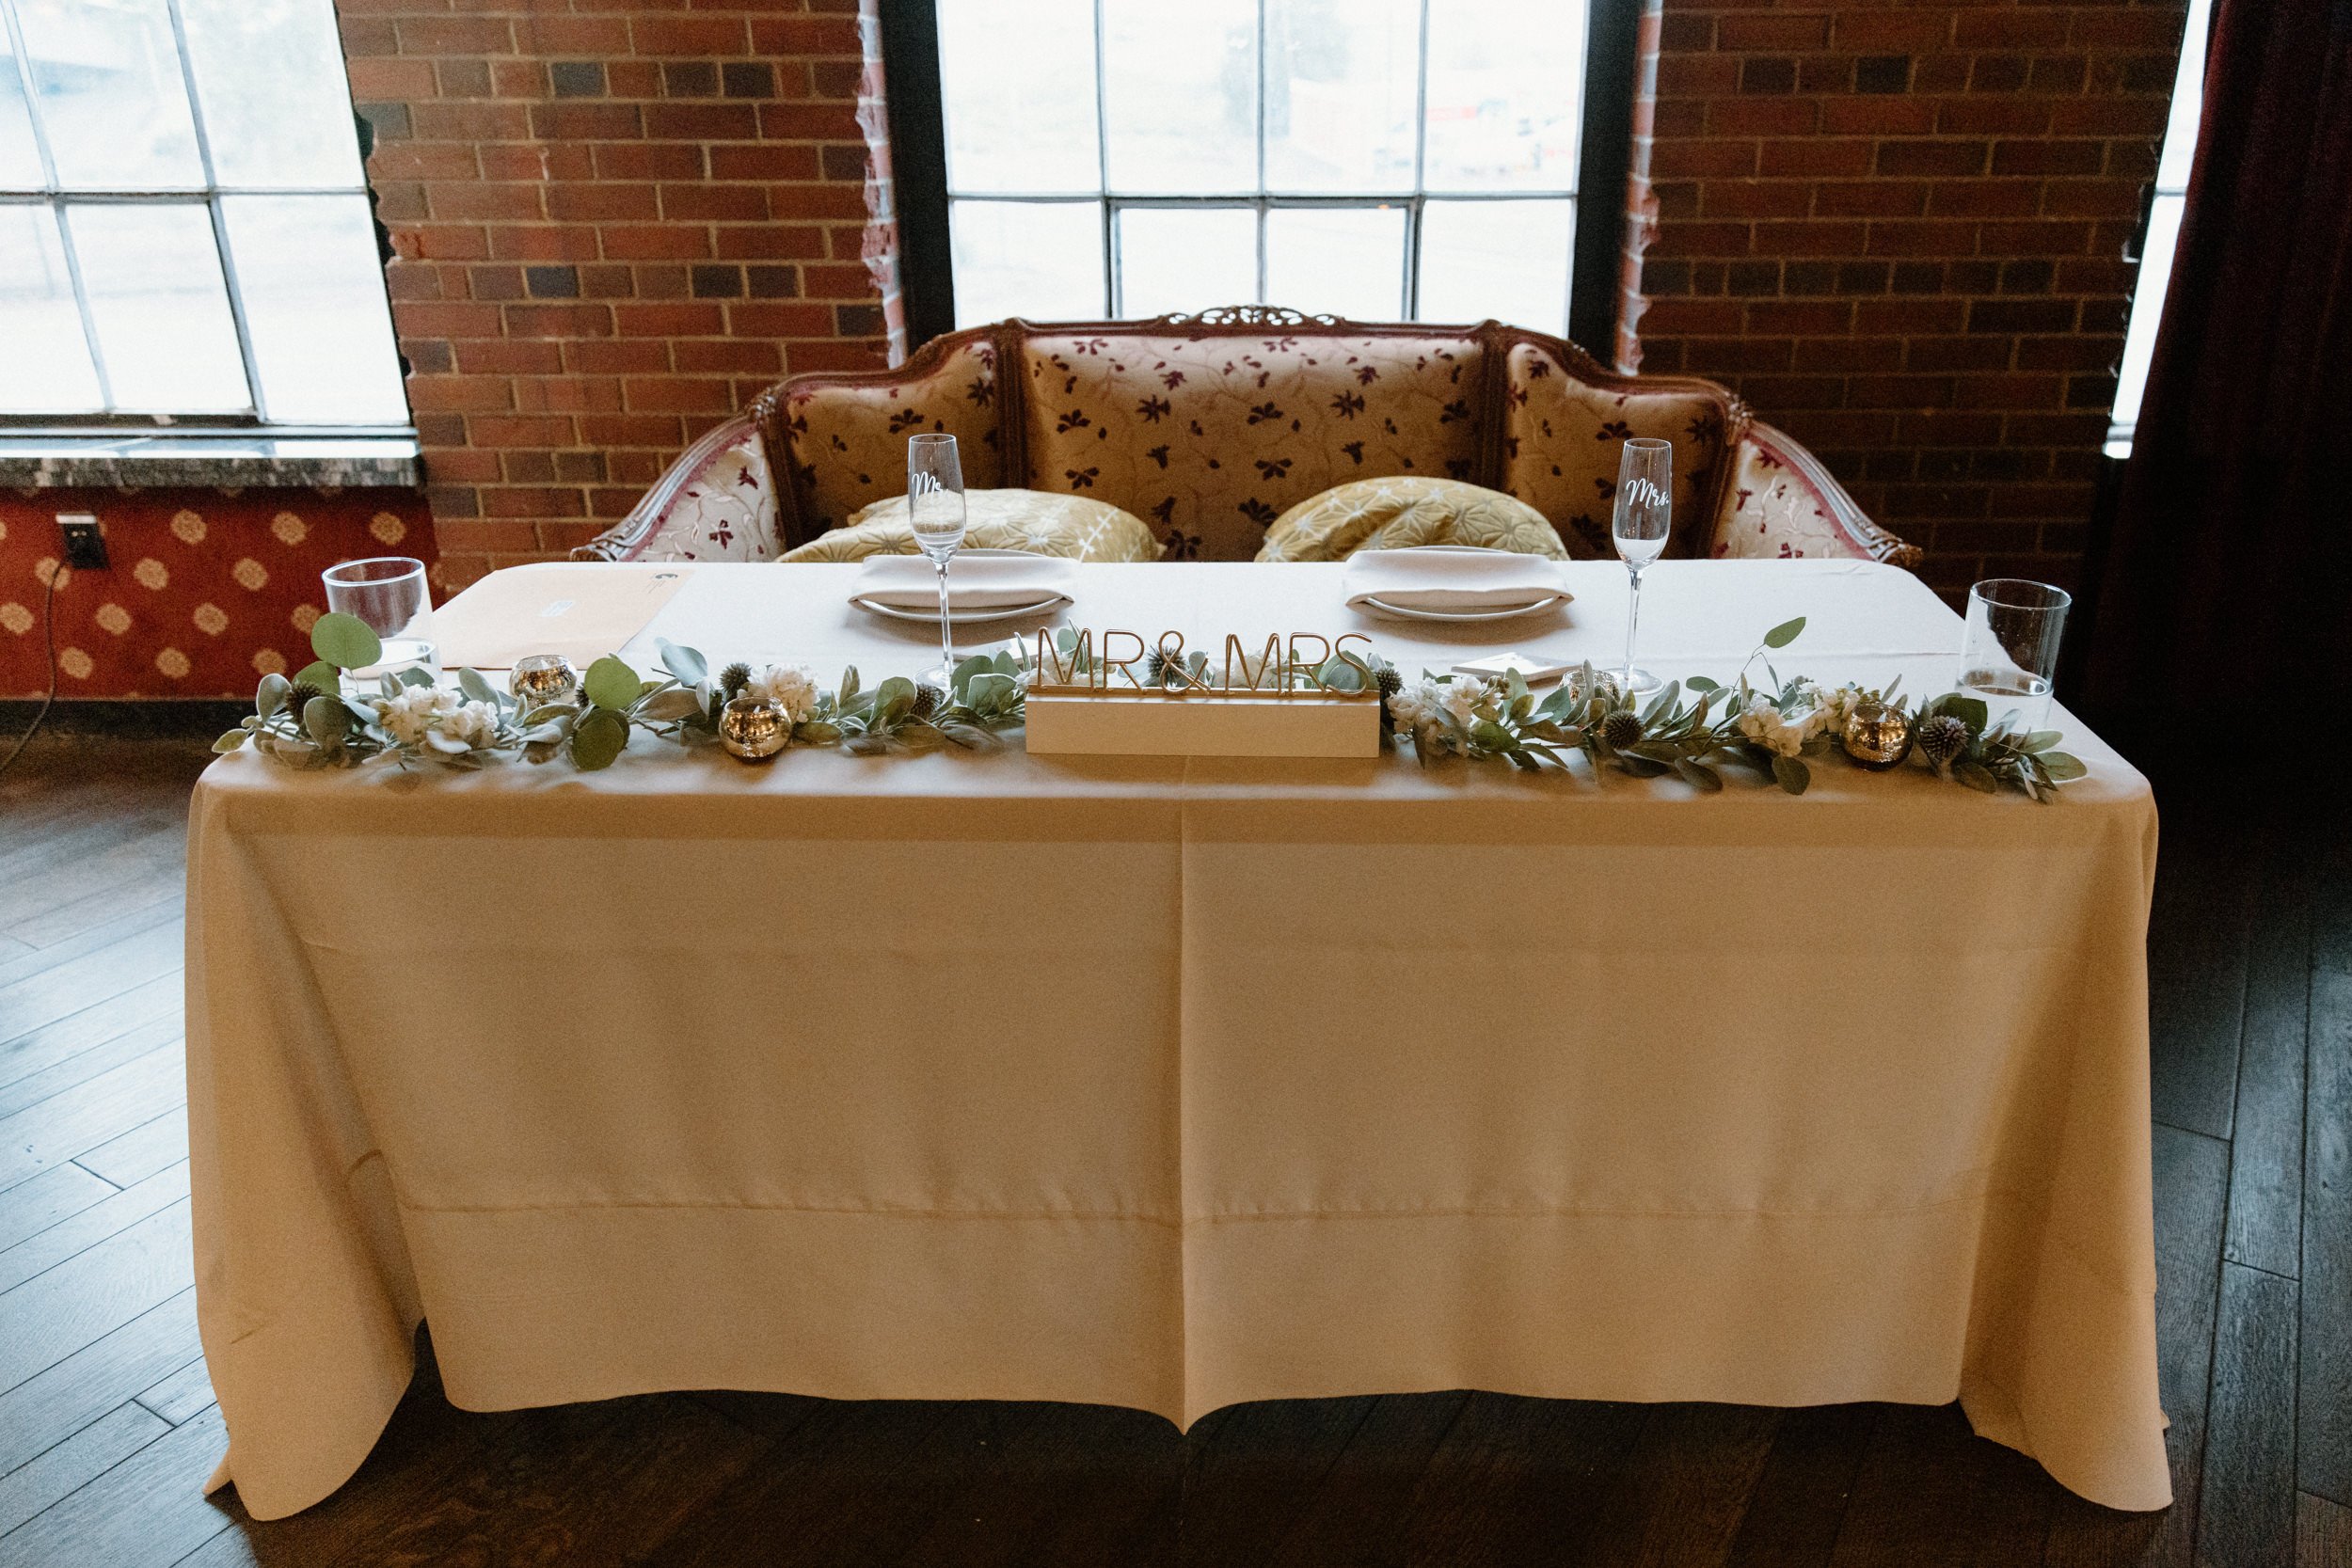 The bride and groom's reception table decorated with greenery